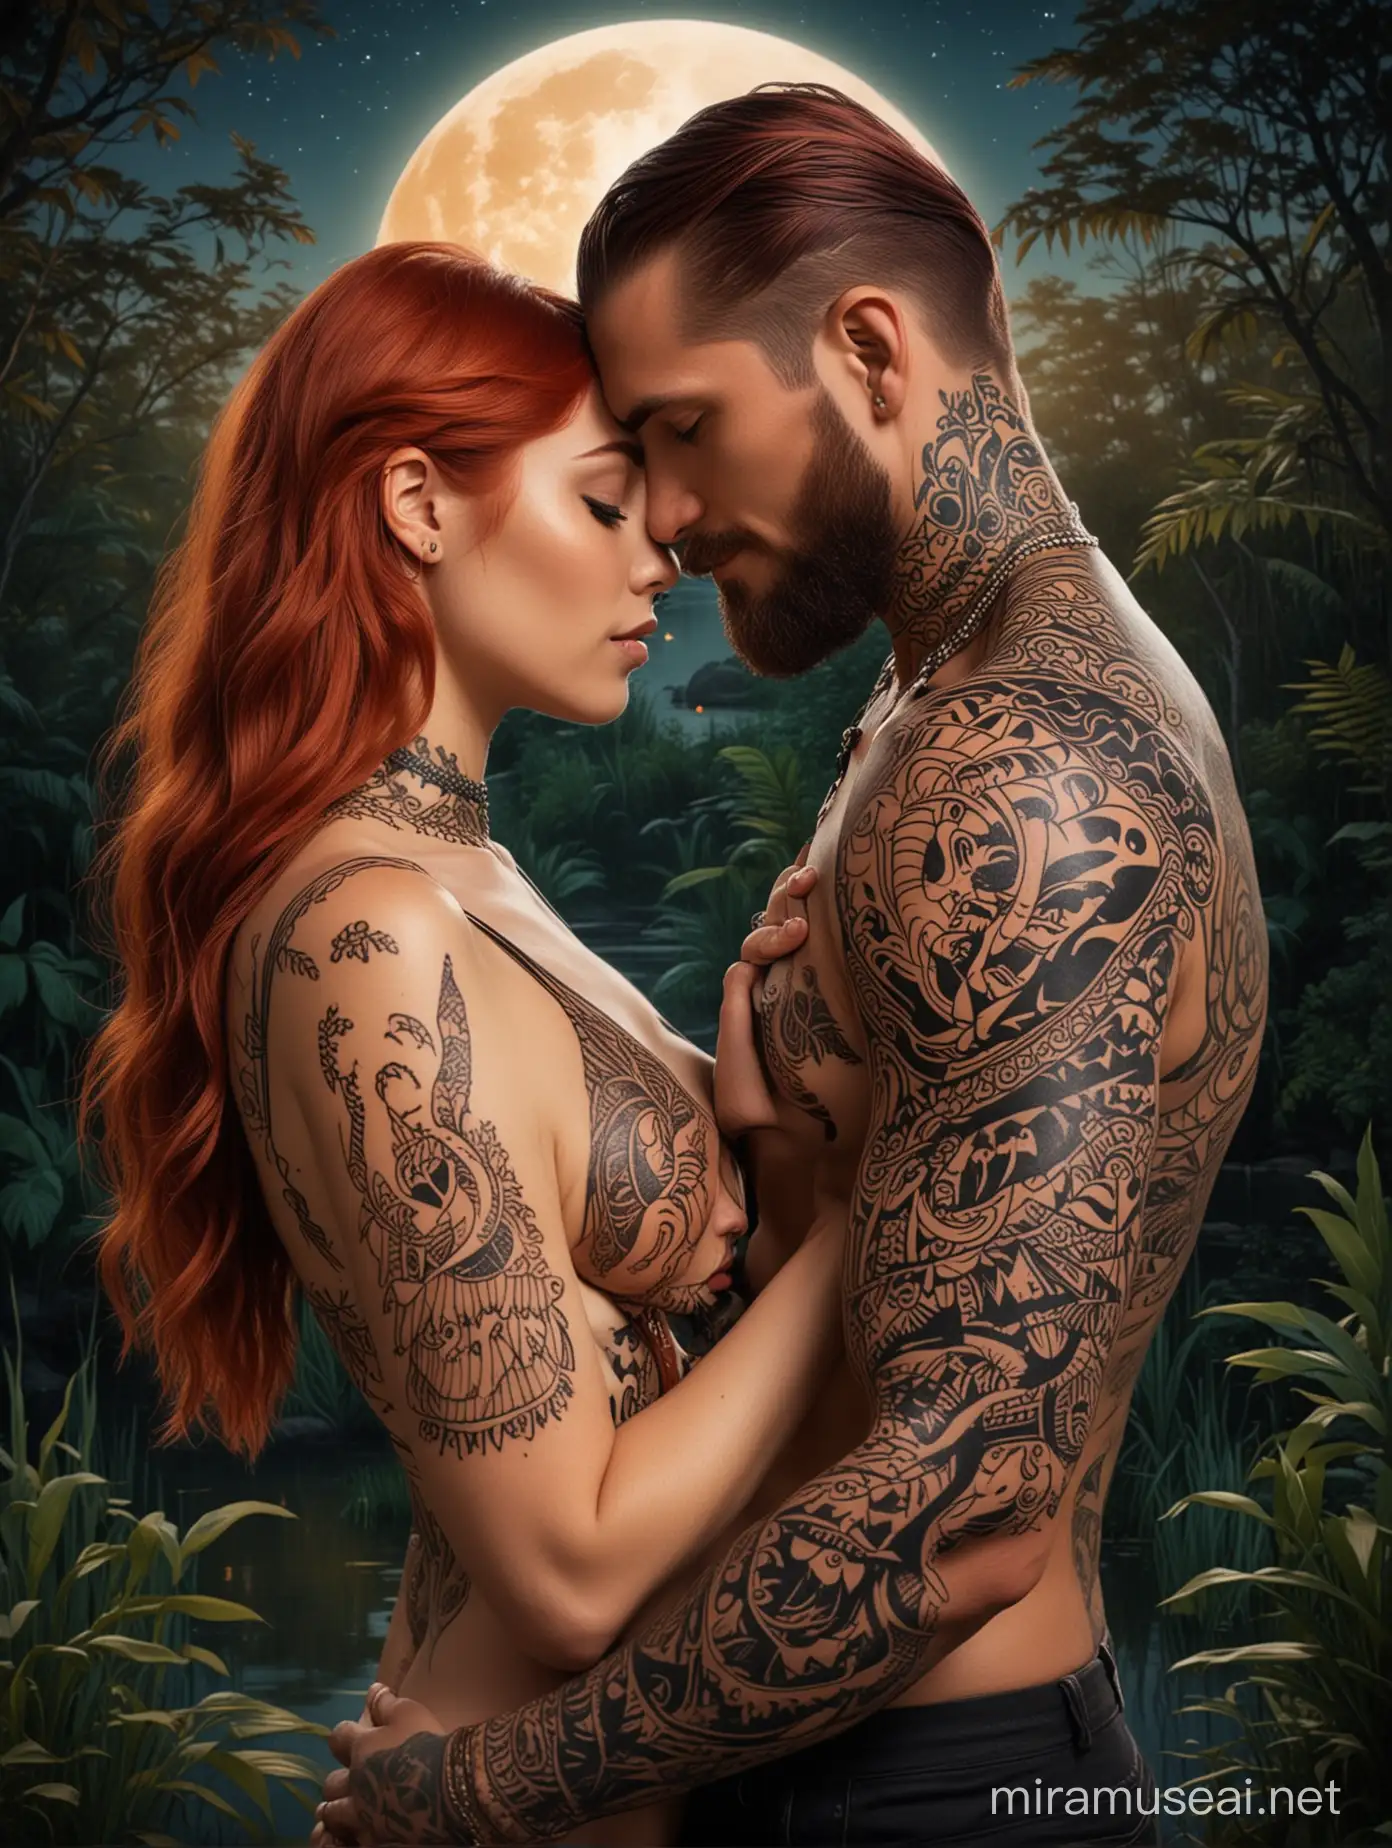 Romantic Couple Embracing in Moonlit Nature with Tribal Tattoos